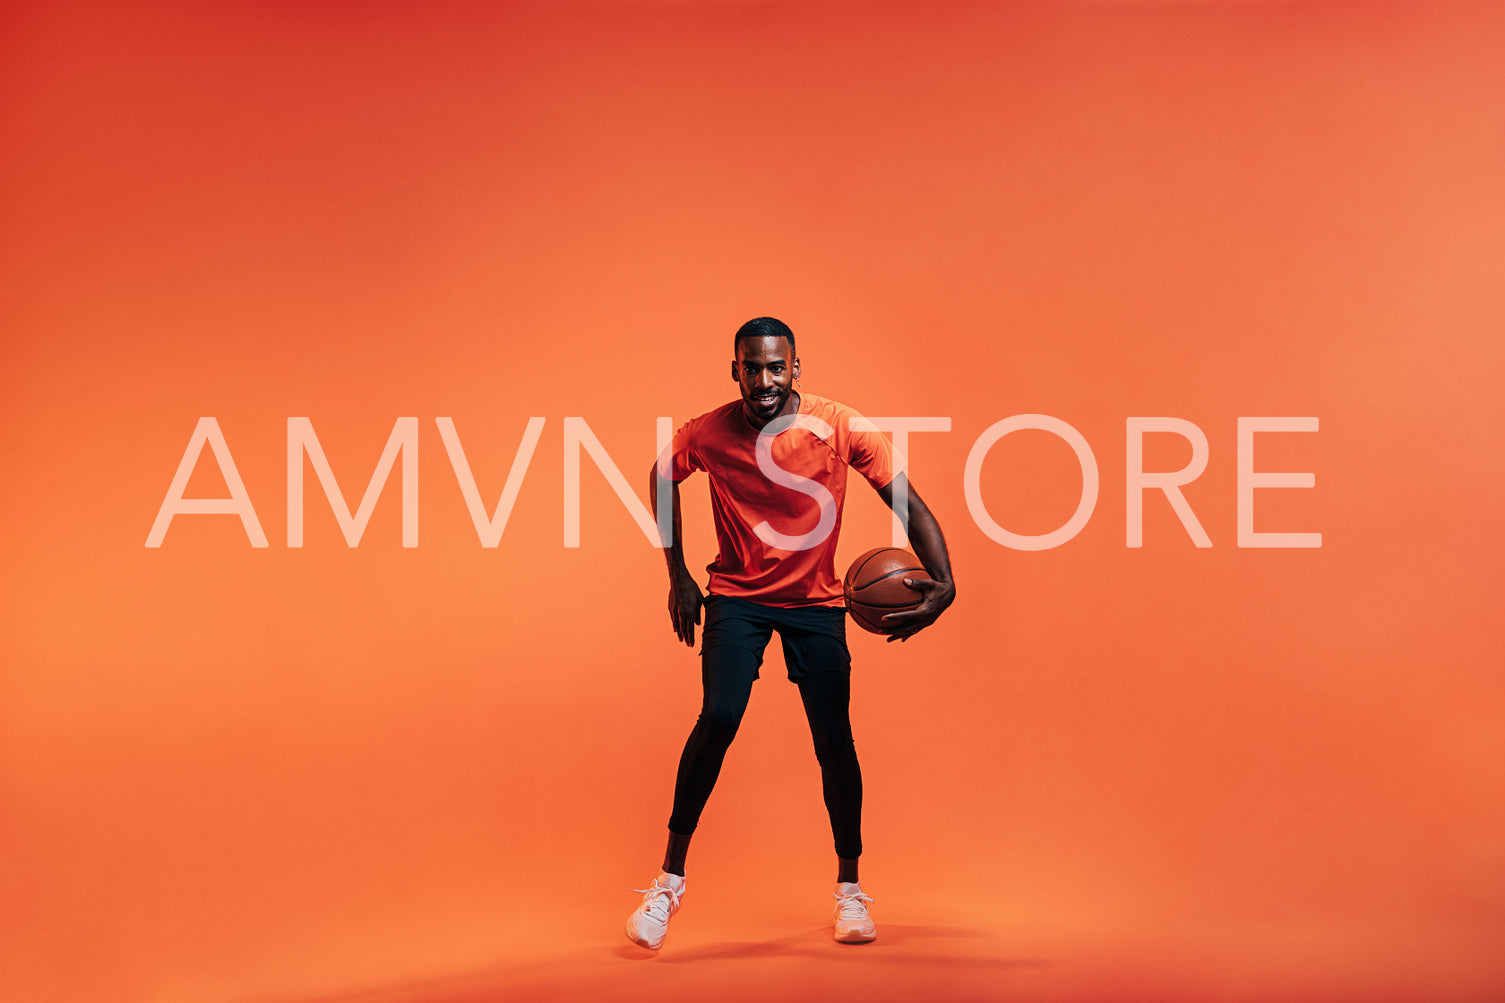 Young sportsman dribbling basket ball in studio against an orange background